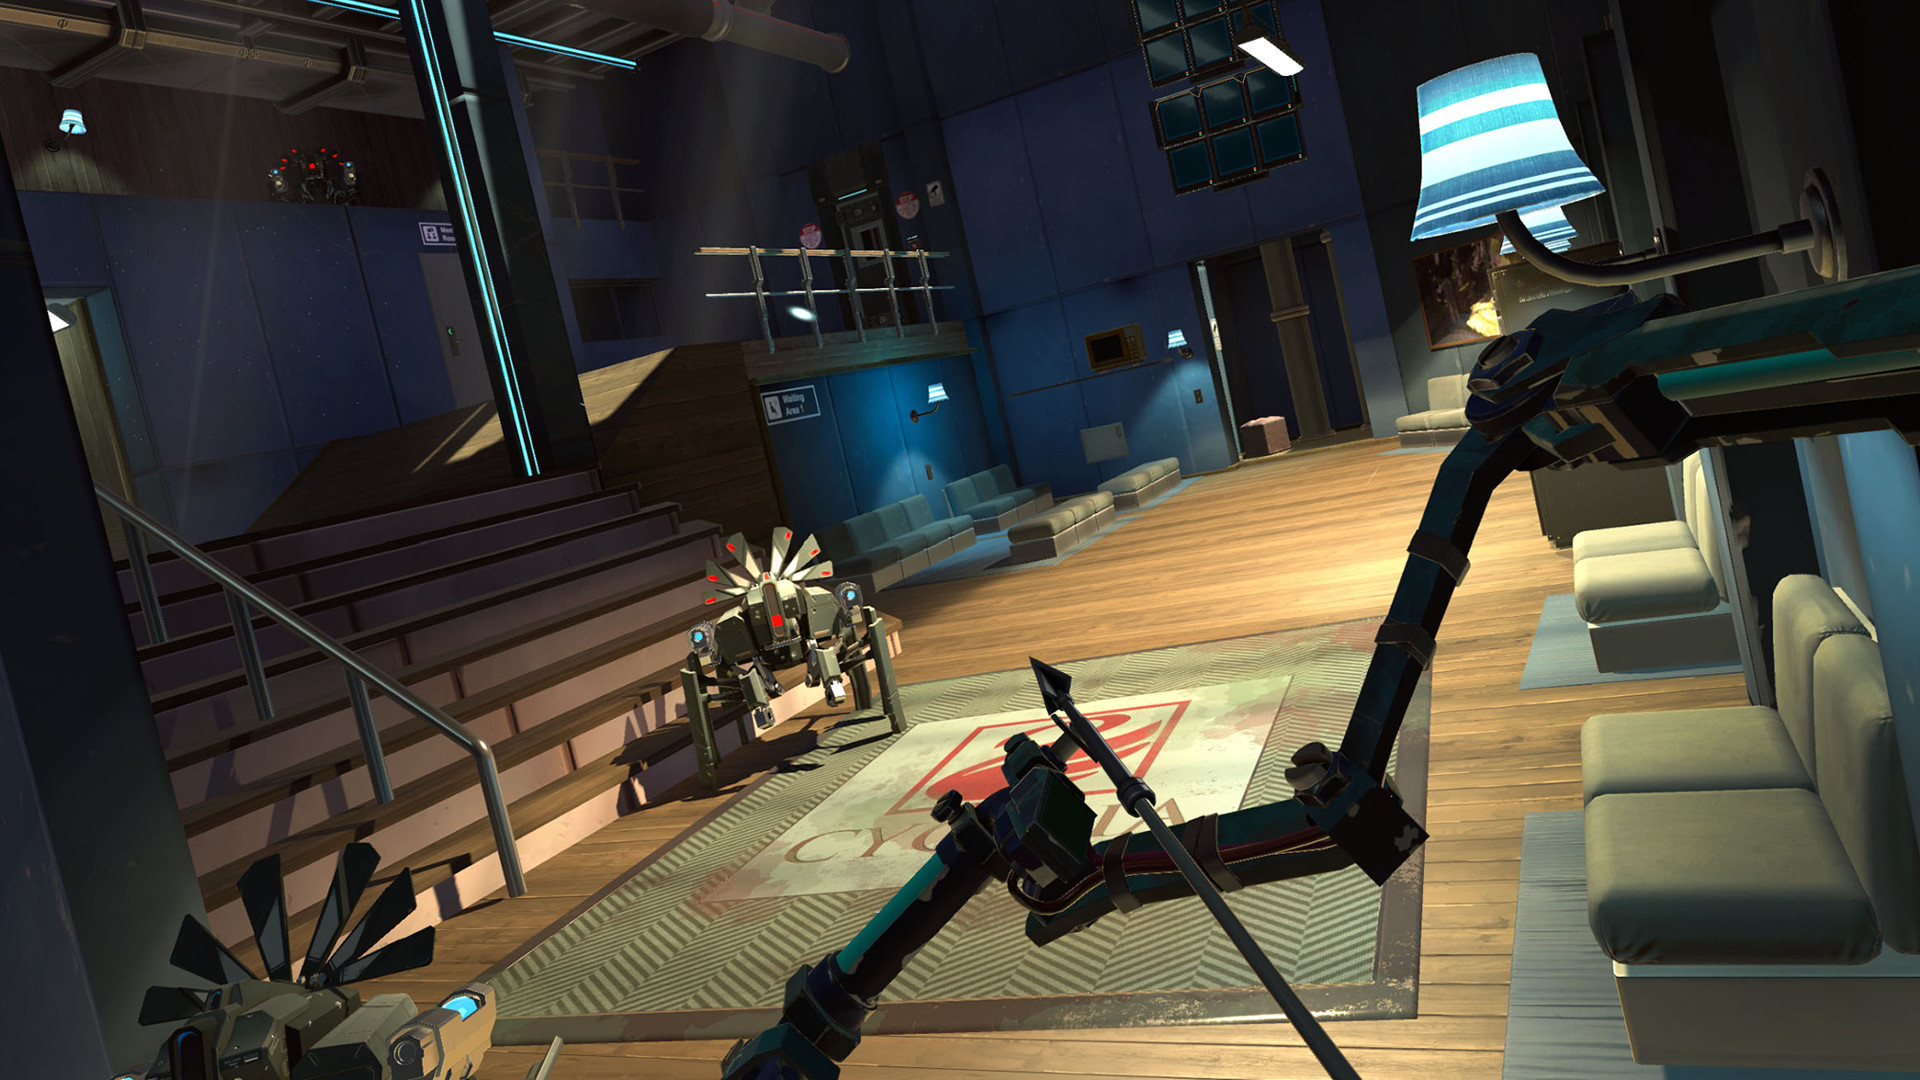 Apex Construct PSVR Update 1.03 Released, Adds New Quick Menu and Tweaks to Movement Controls